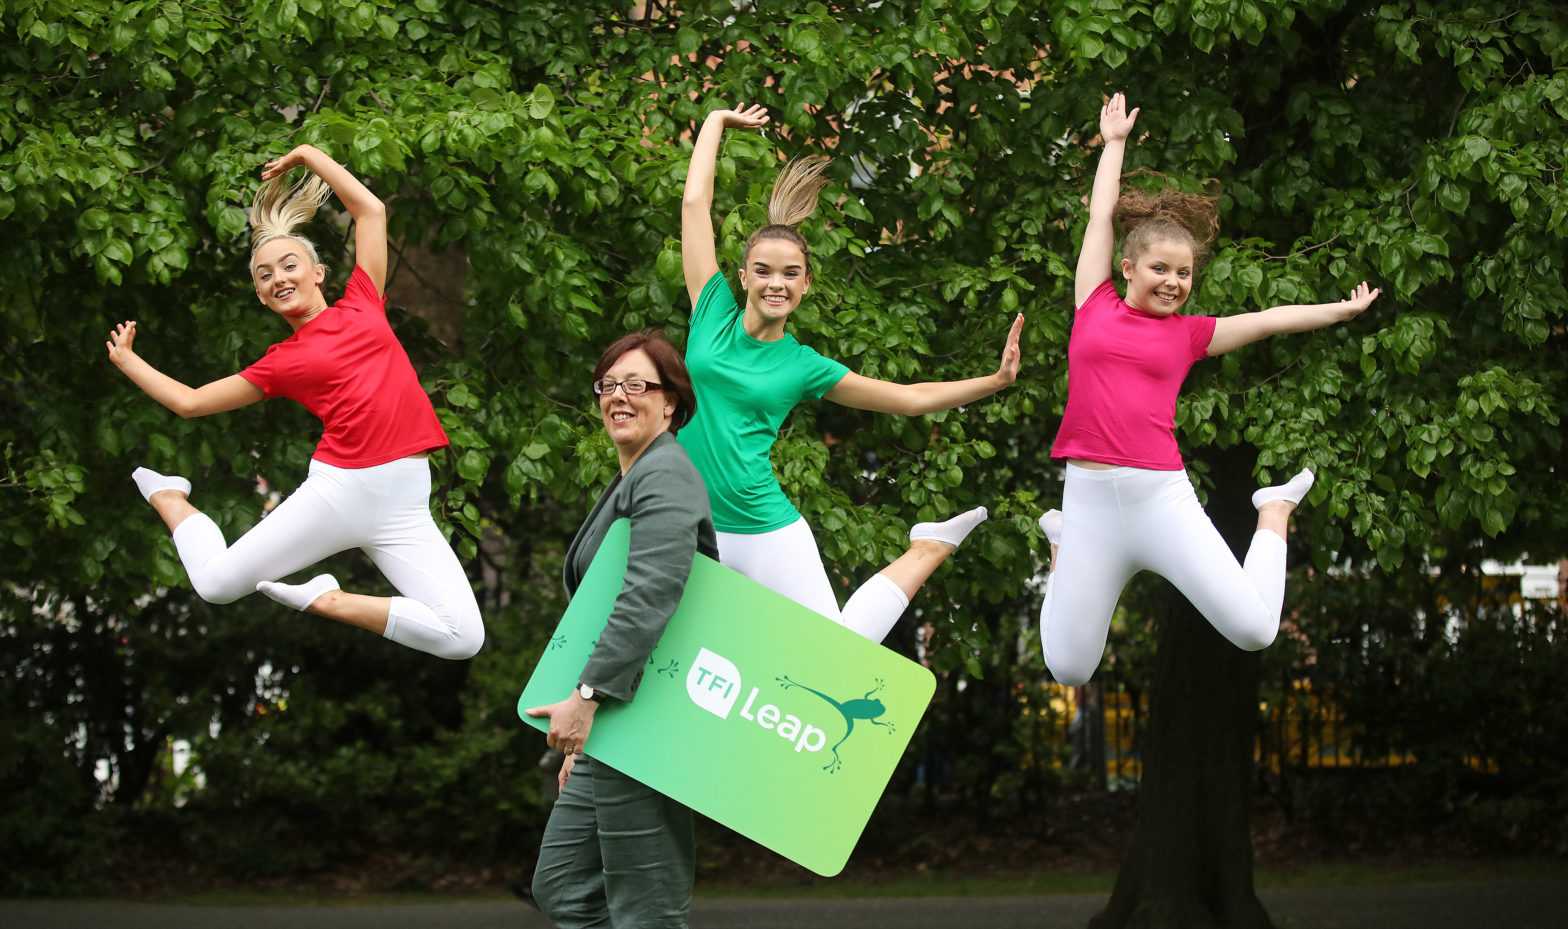 reaching-new-heights-tfi-leap-card-passes-3-million-mark-transport-for-ireland